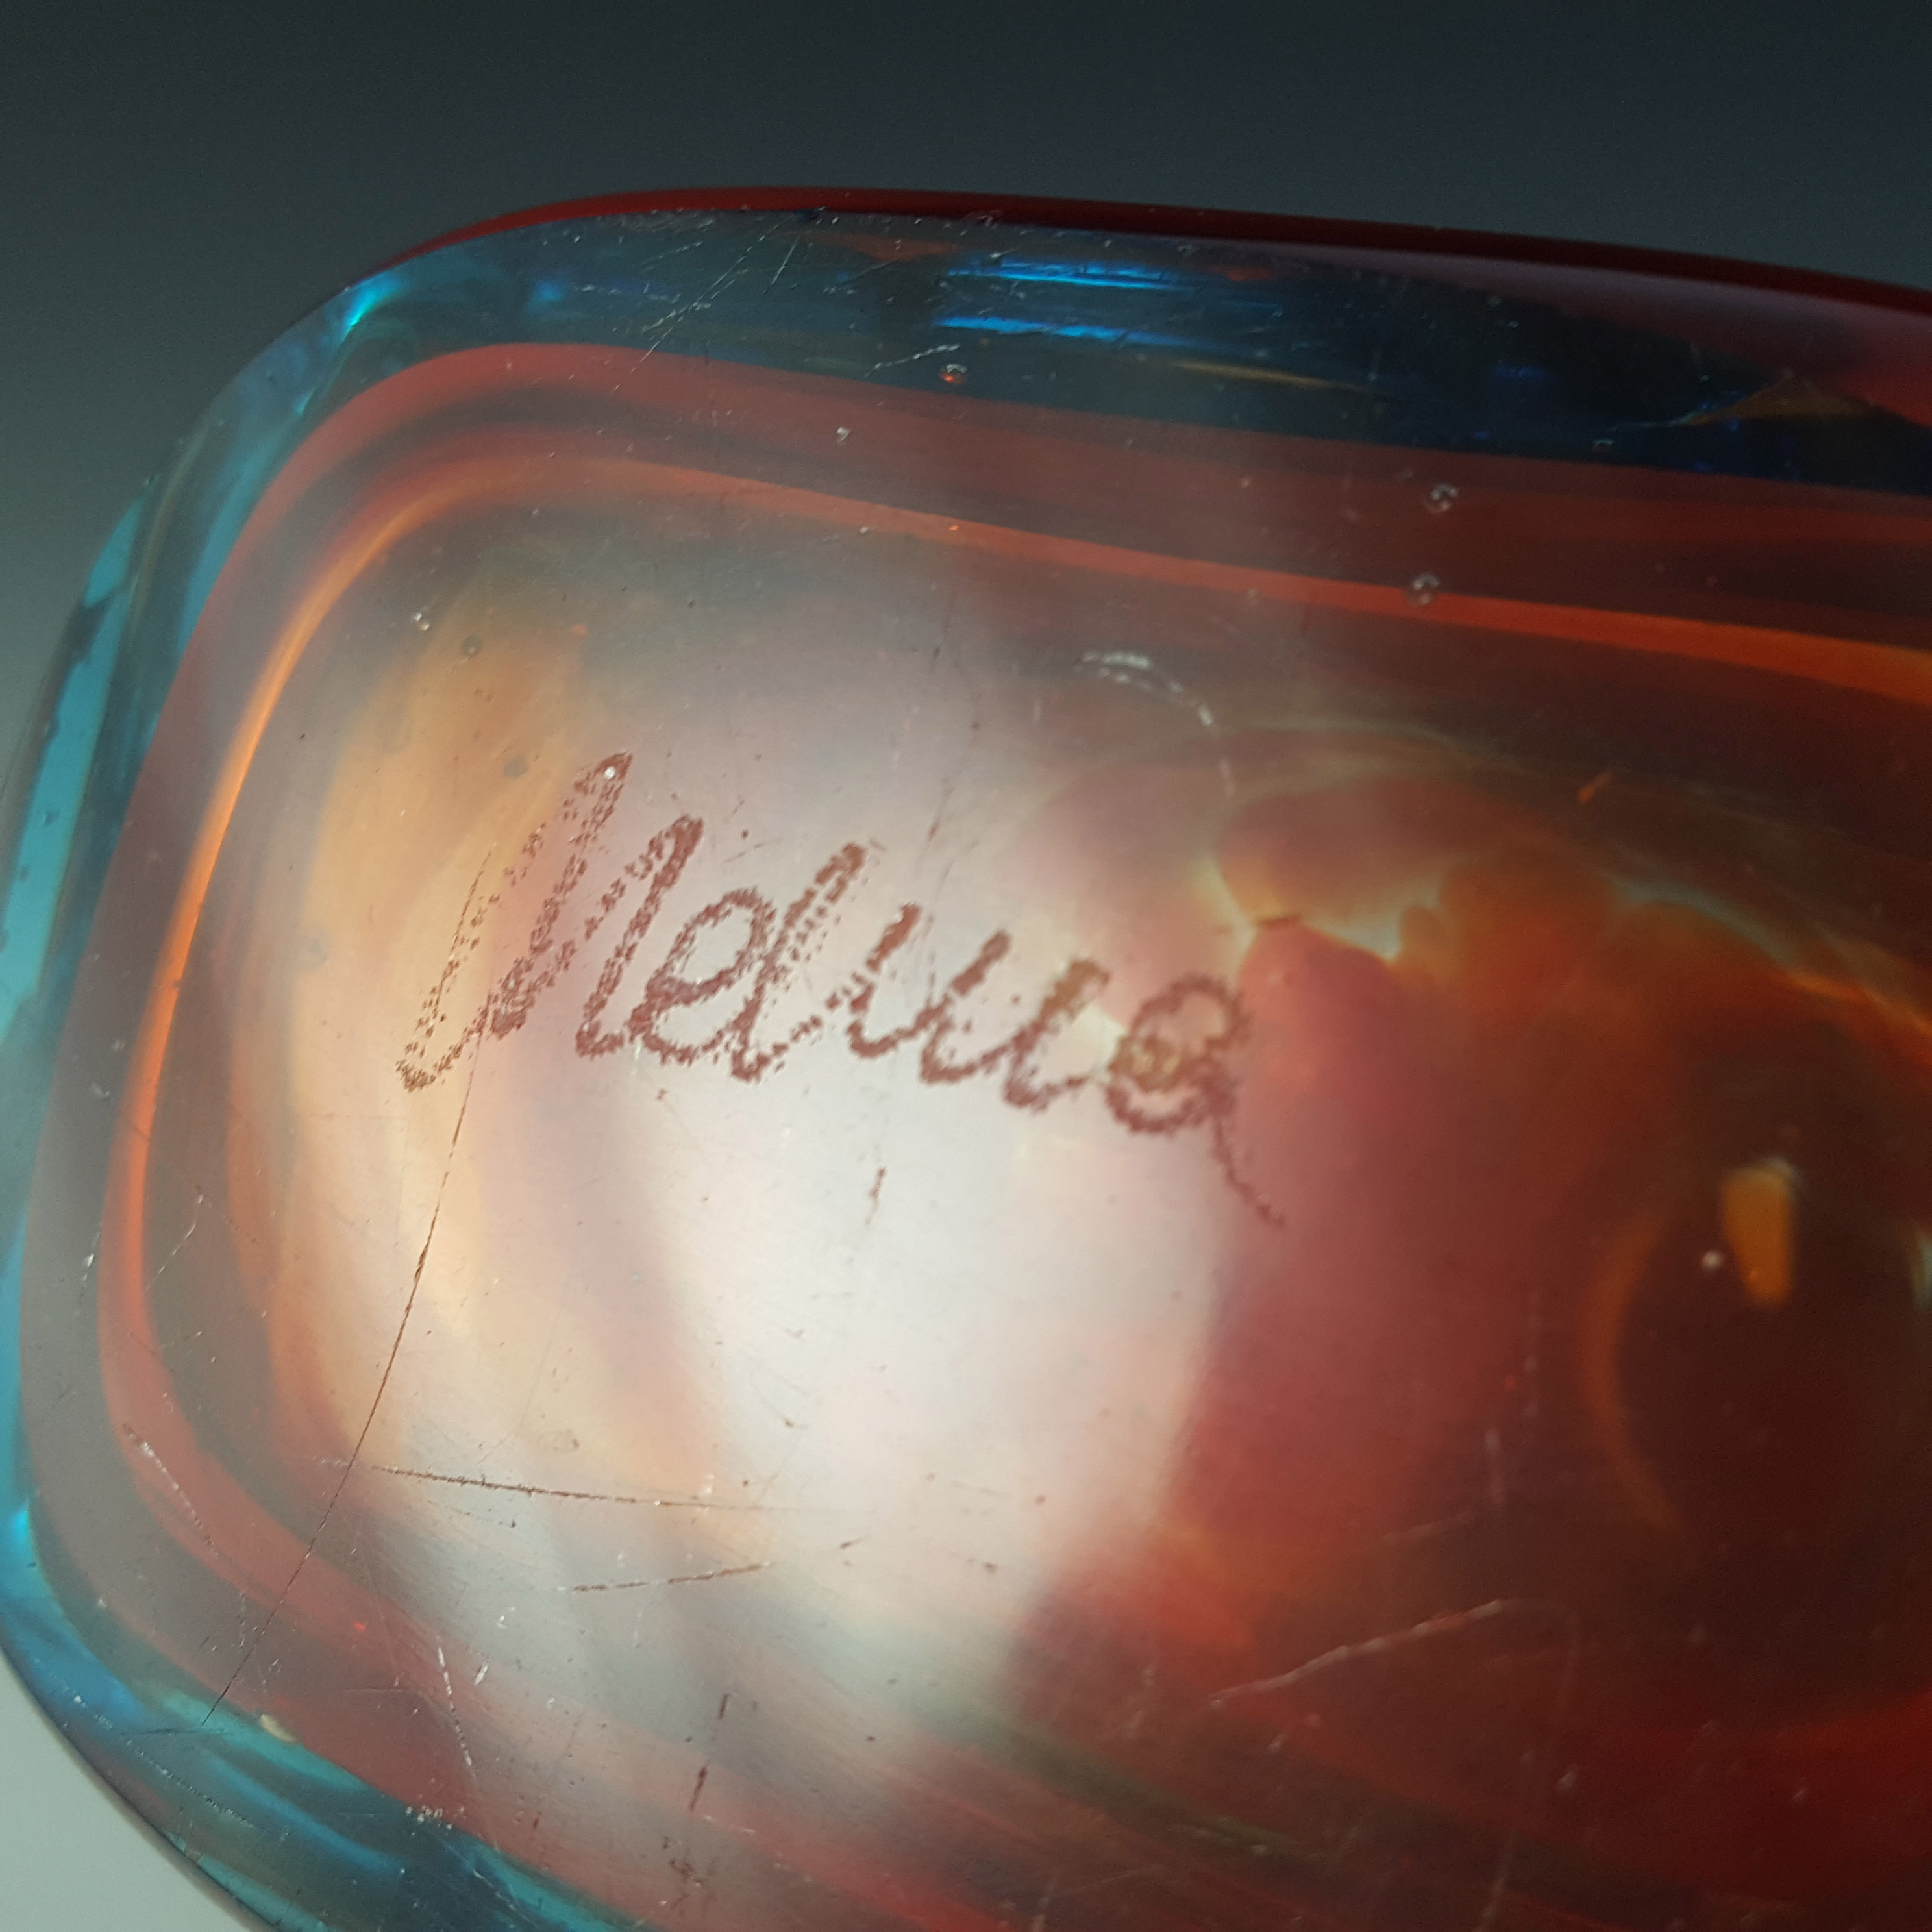 SIGNED Mdina Maltese Red & Blue Glass Threaded Bottle - Click Image to Close